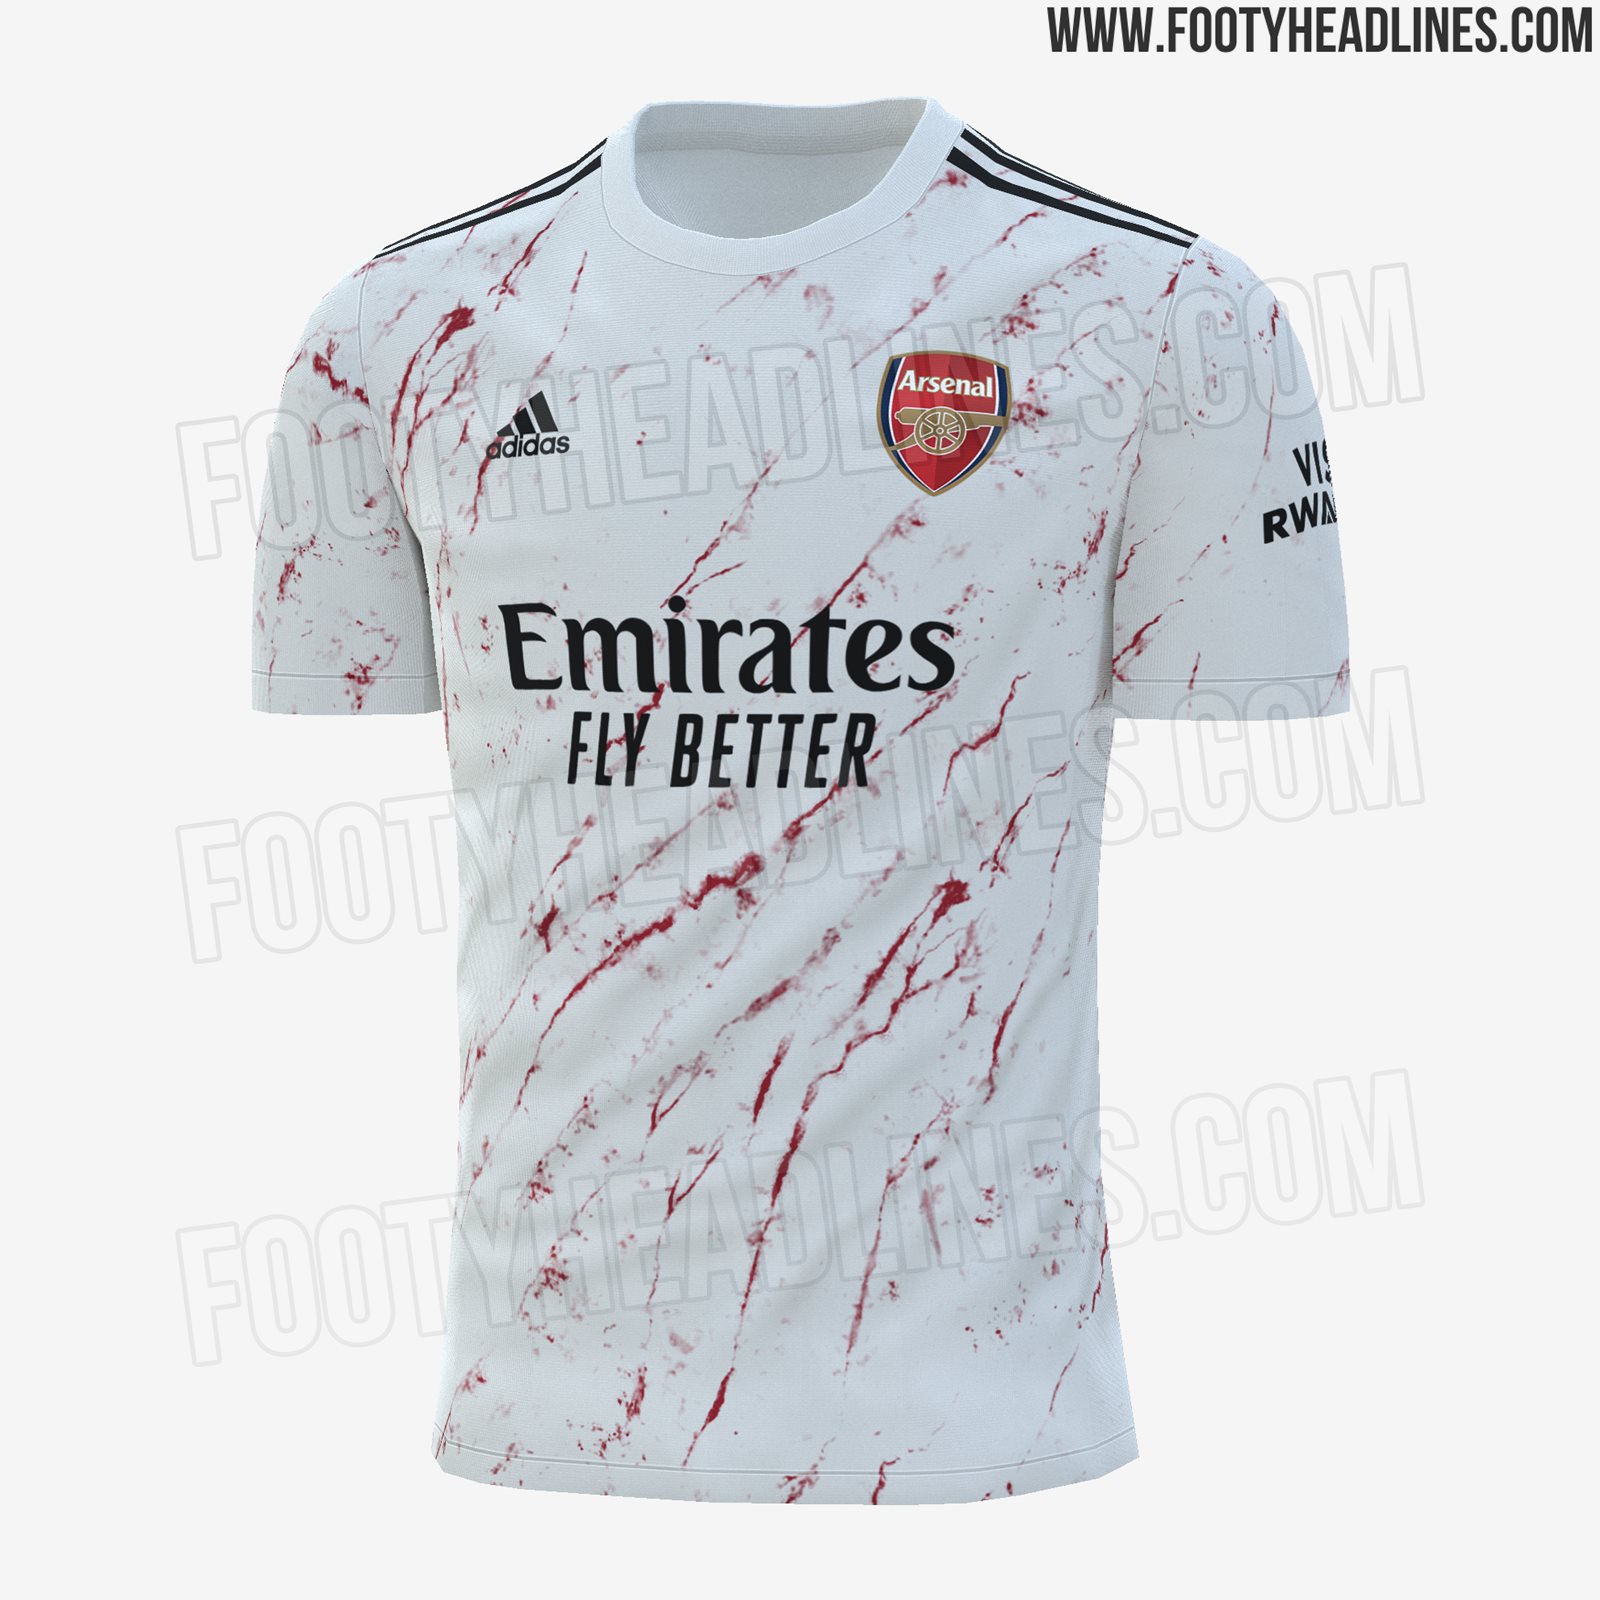 Arsenal S Away Kit For 2020 21 Leaked Features Marble White Shirt With A Red Streak Pattern